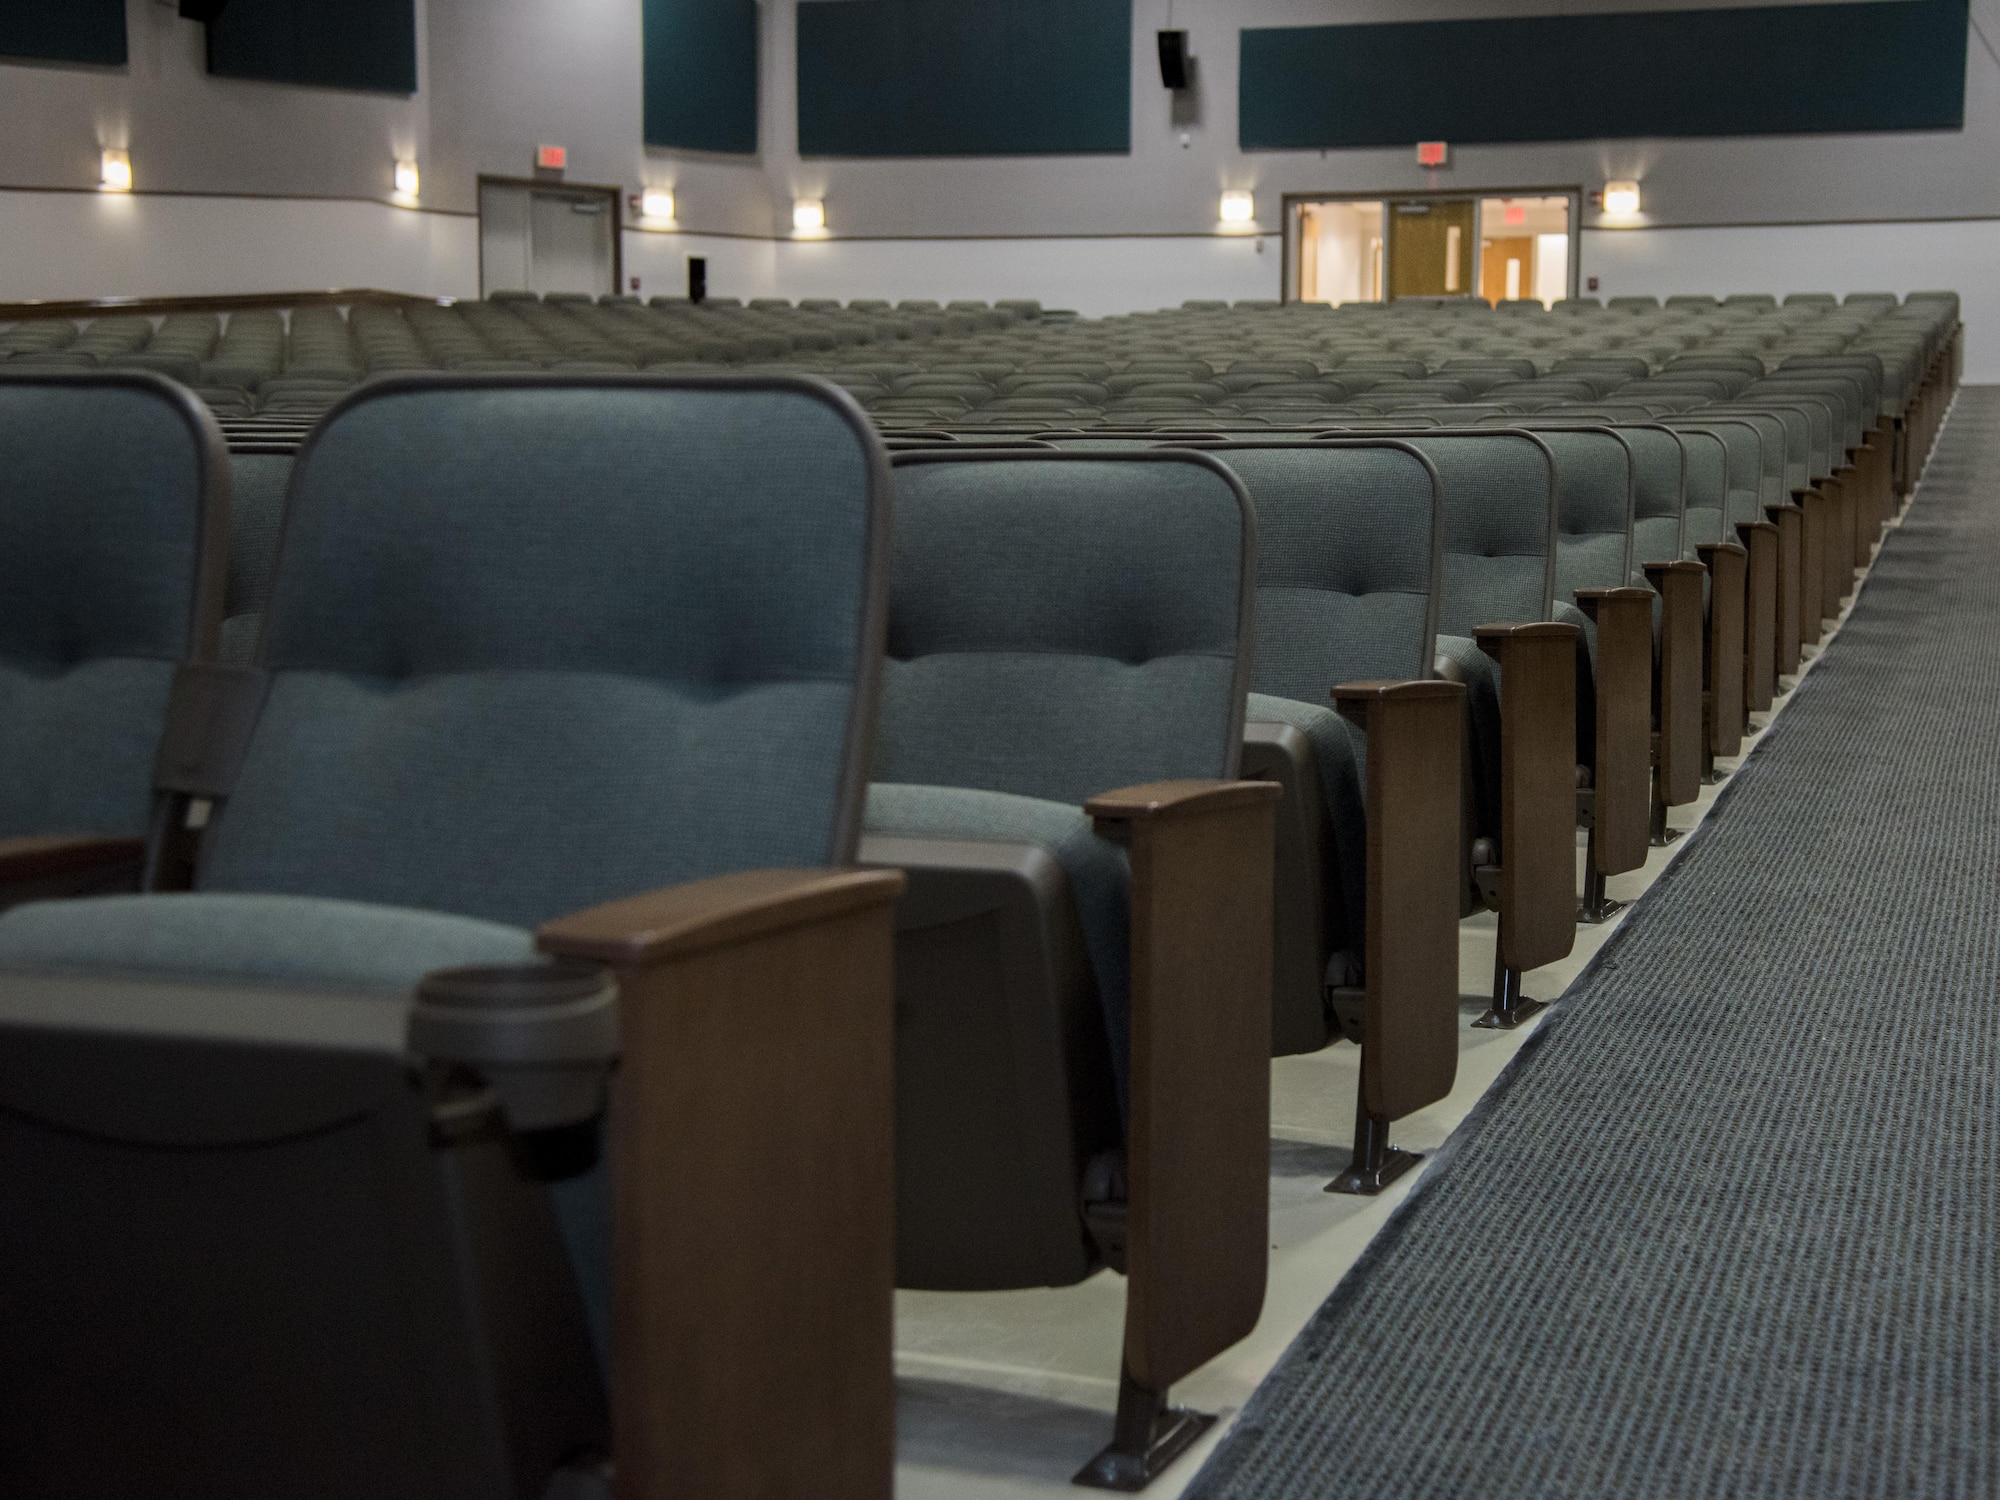 Seats line the inside of the base theater at Joint Base Andrews, Md., March 3, 2017. The theater seating was newly renovated in January and can accommodate roughly 1,000 audience members at a time. A free movie screening of “Kong: Skull Island” for Department of Defense cardholders is scheduled during the base theater grand opening, March 4, 2017, at 7 p.m.  (U.S. Air Force photo by Airman 1st Class Valentina Lopez)